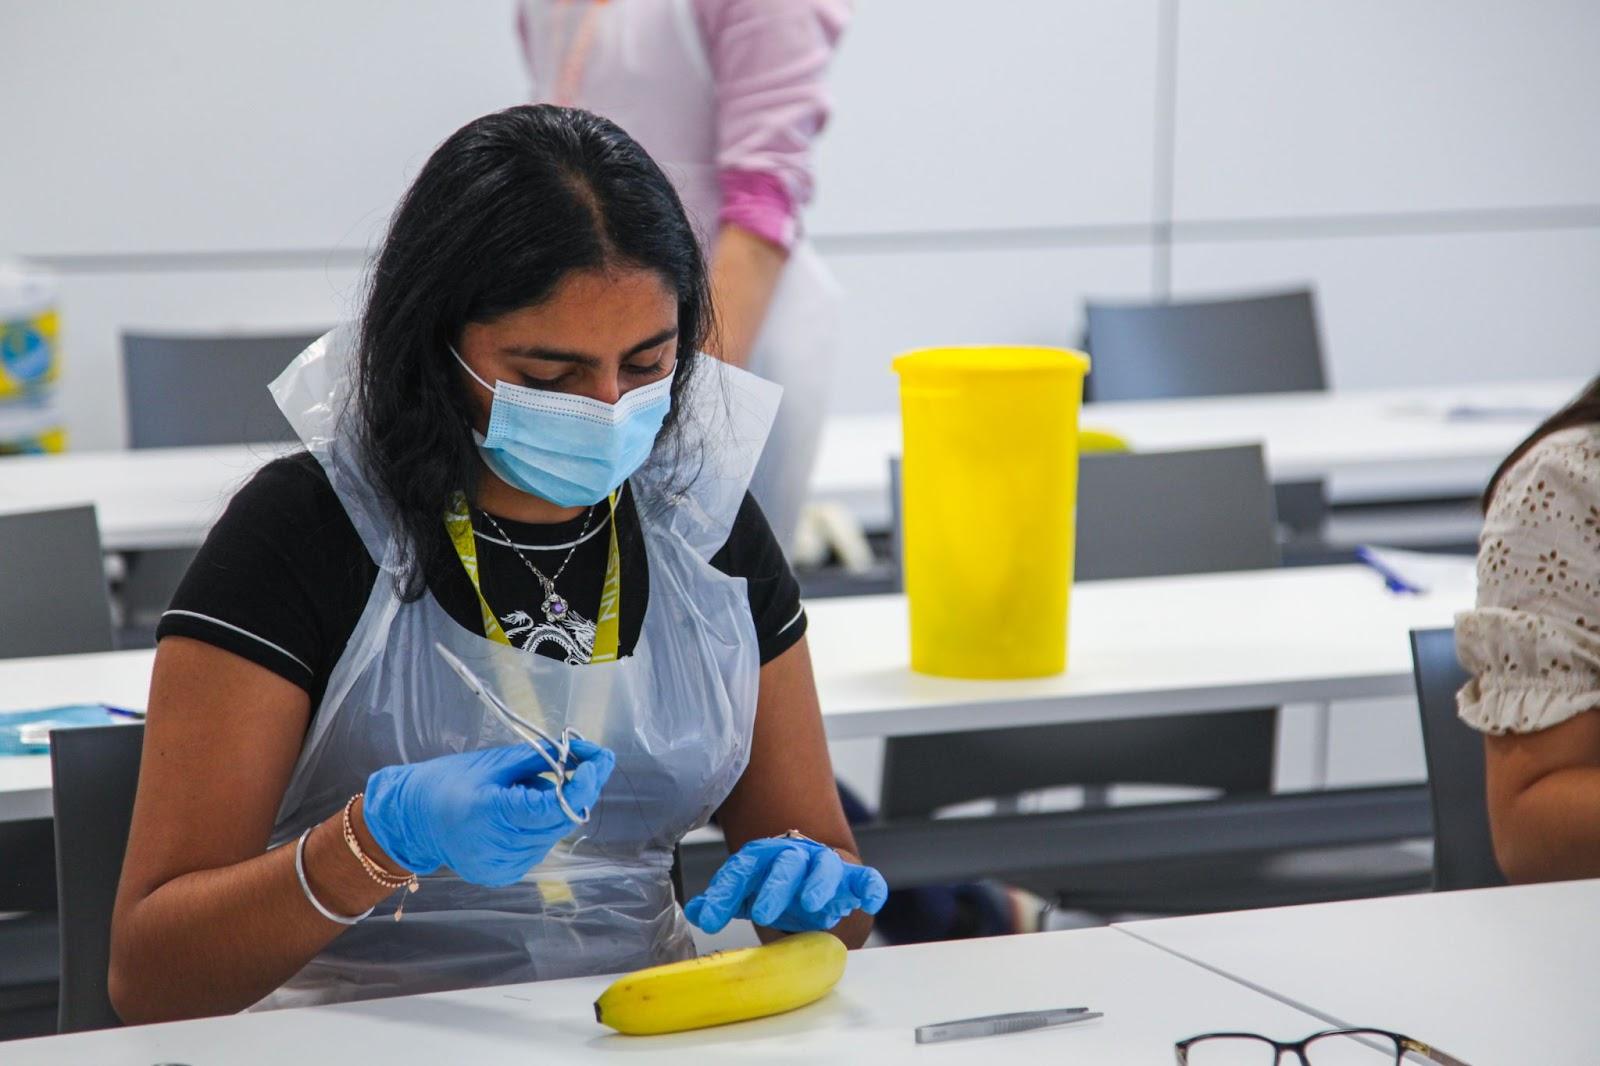 A medical student conducting practical work on a banana in a classroom